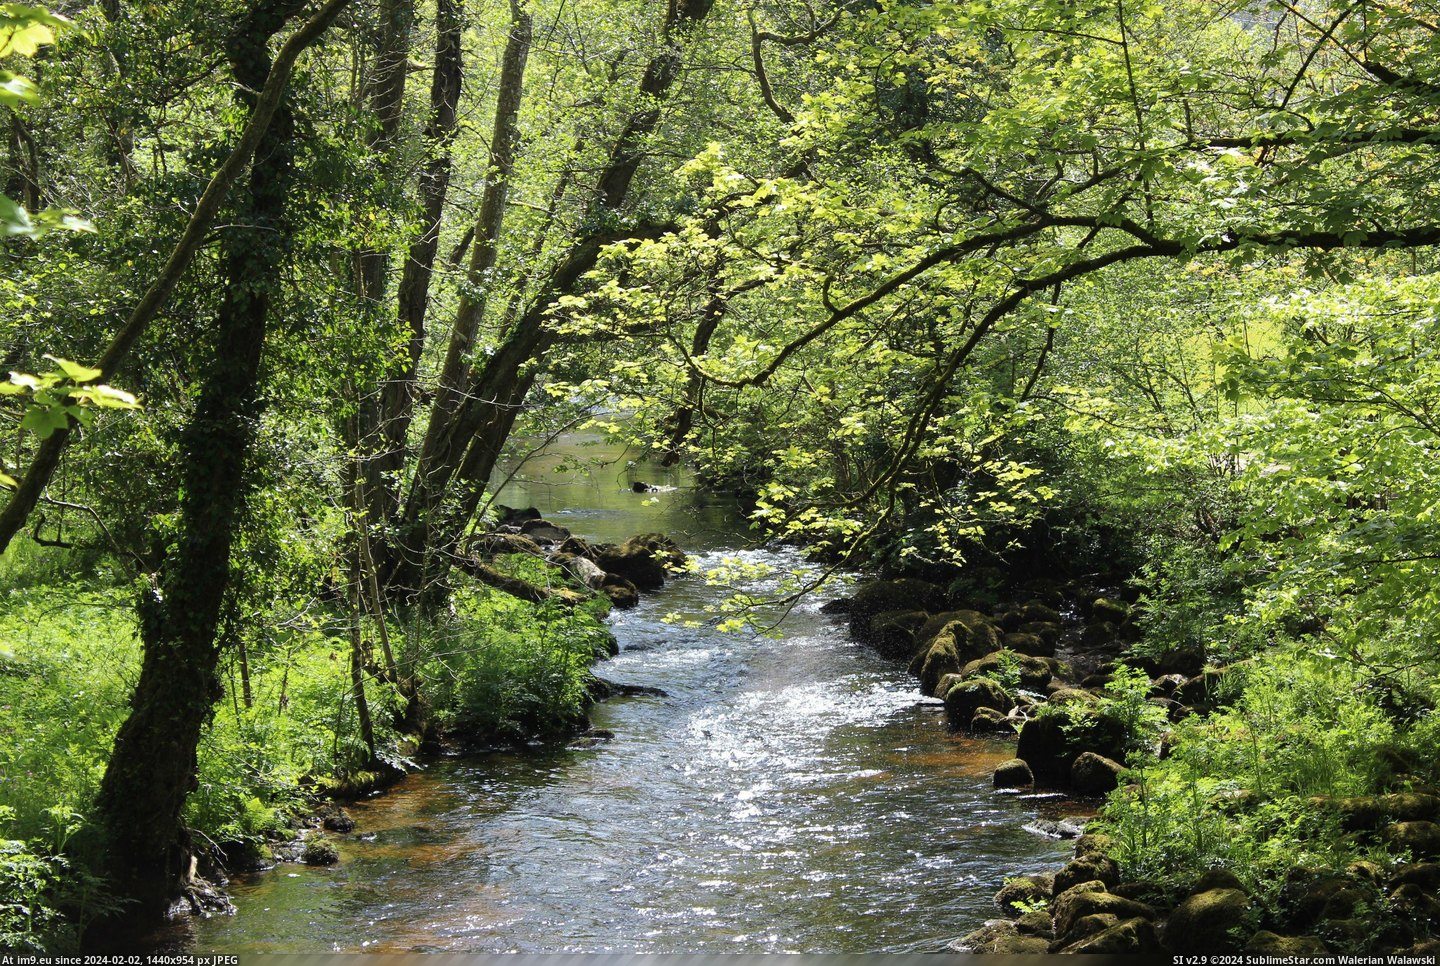 #River #England #5184x3456 #Forest [Earthporn] A secluded forest river - Dartmoor, England [5184x3456] Pic. (Изображение из альбом My r/EARTHPORN favs))